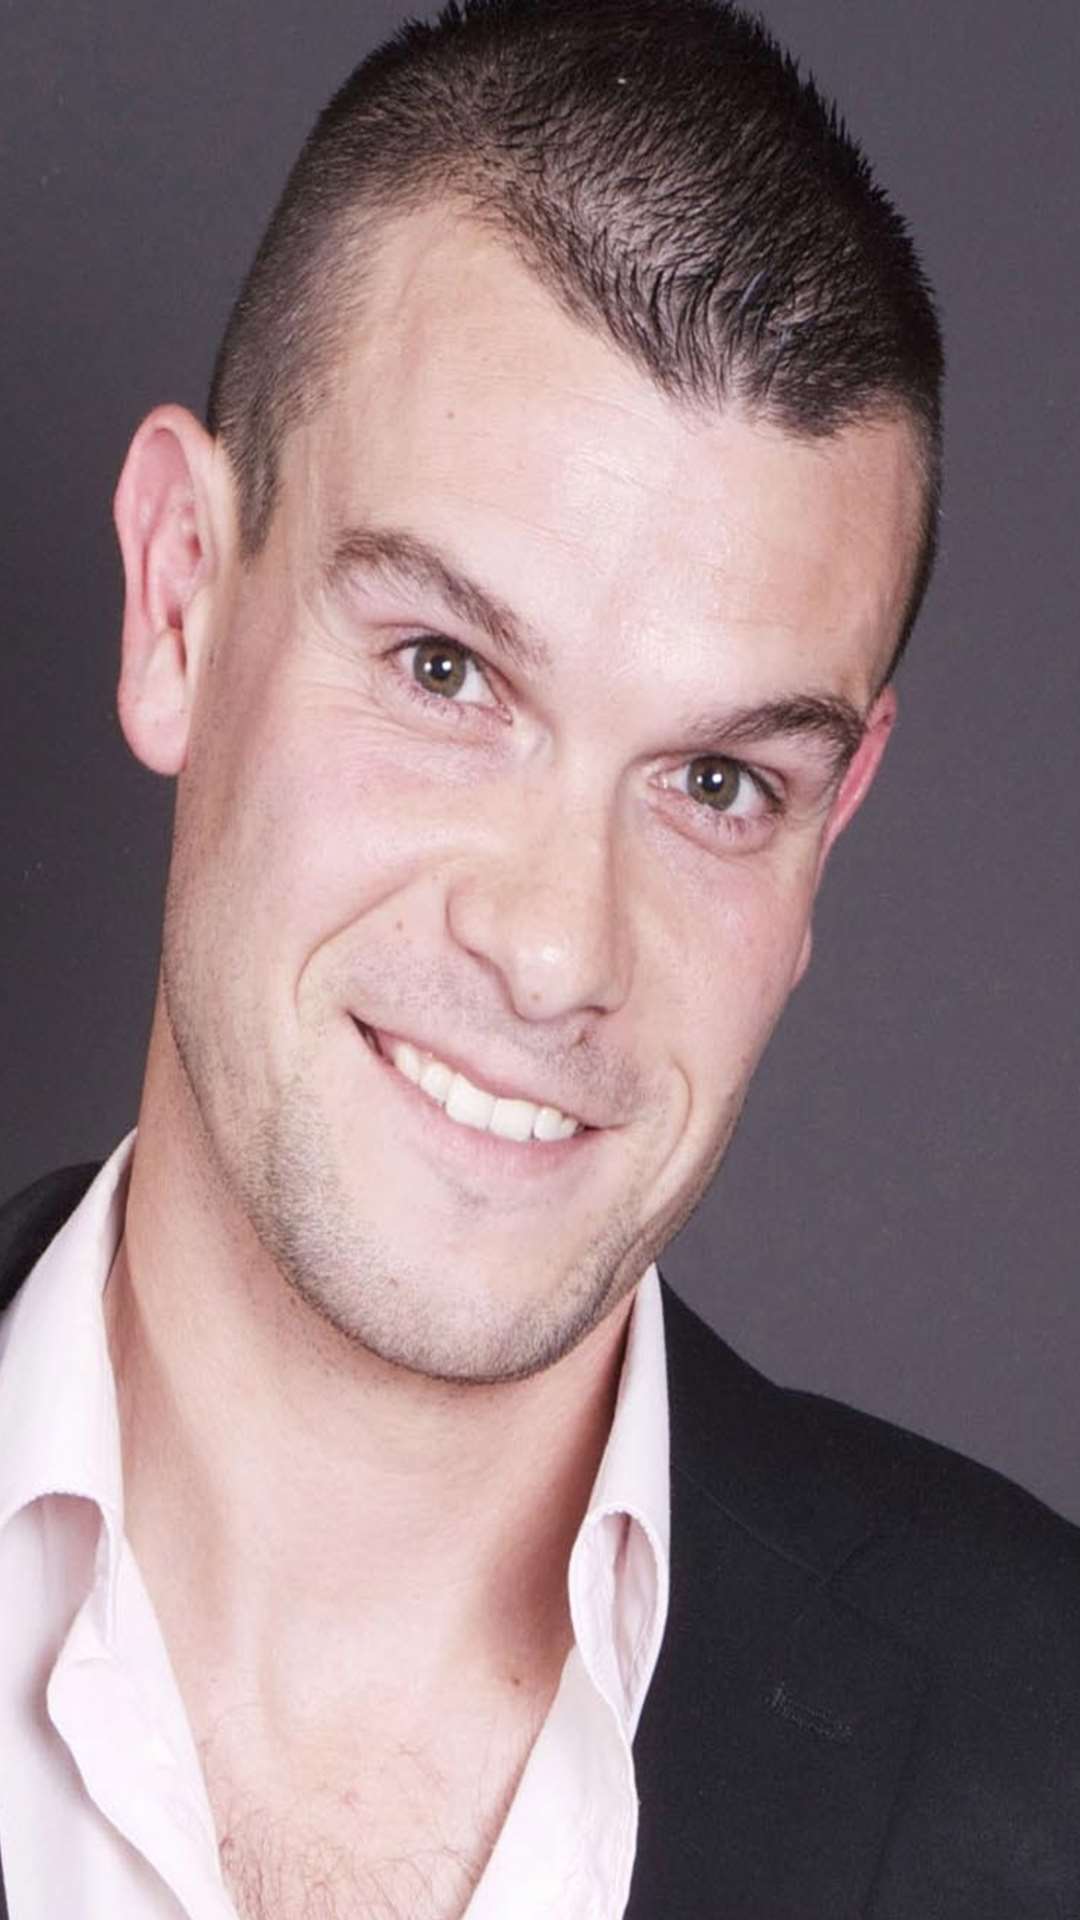 Big Brother contestant Callum Knell, from Maidstone